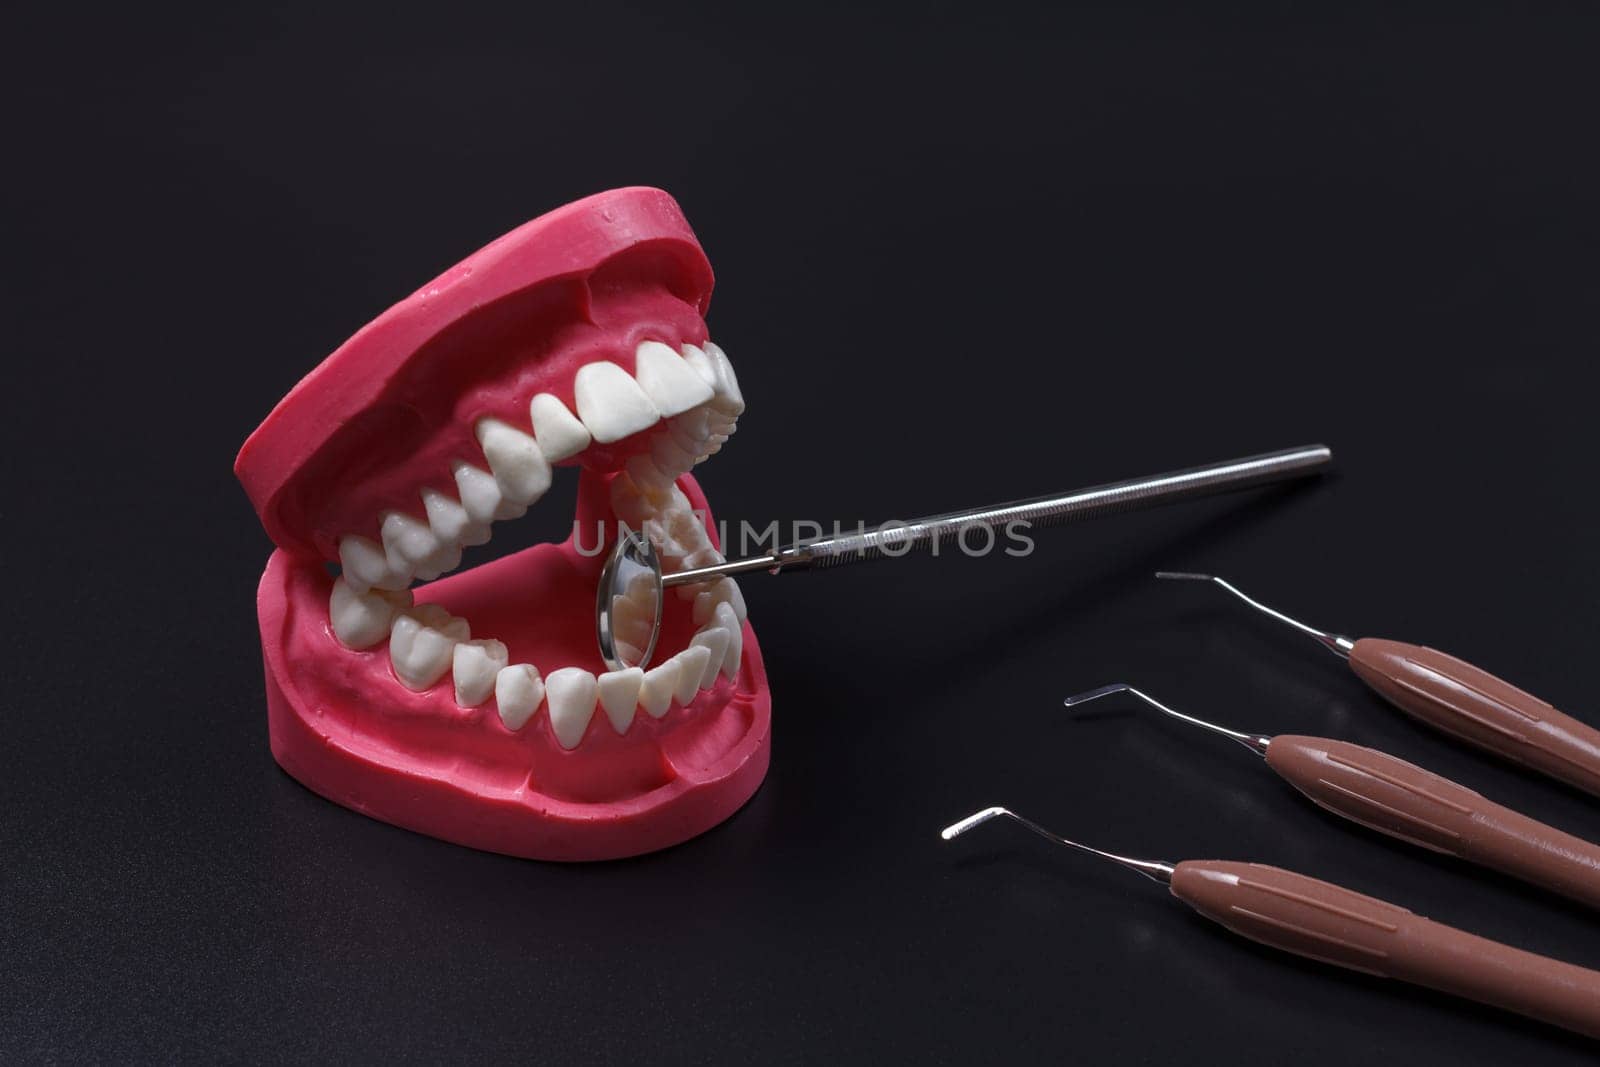 Layout of the human jaw with the mouth mirror and the dental restoration instruments on the black background. Medical tools.